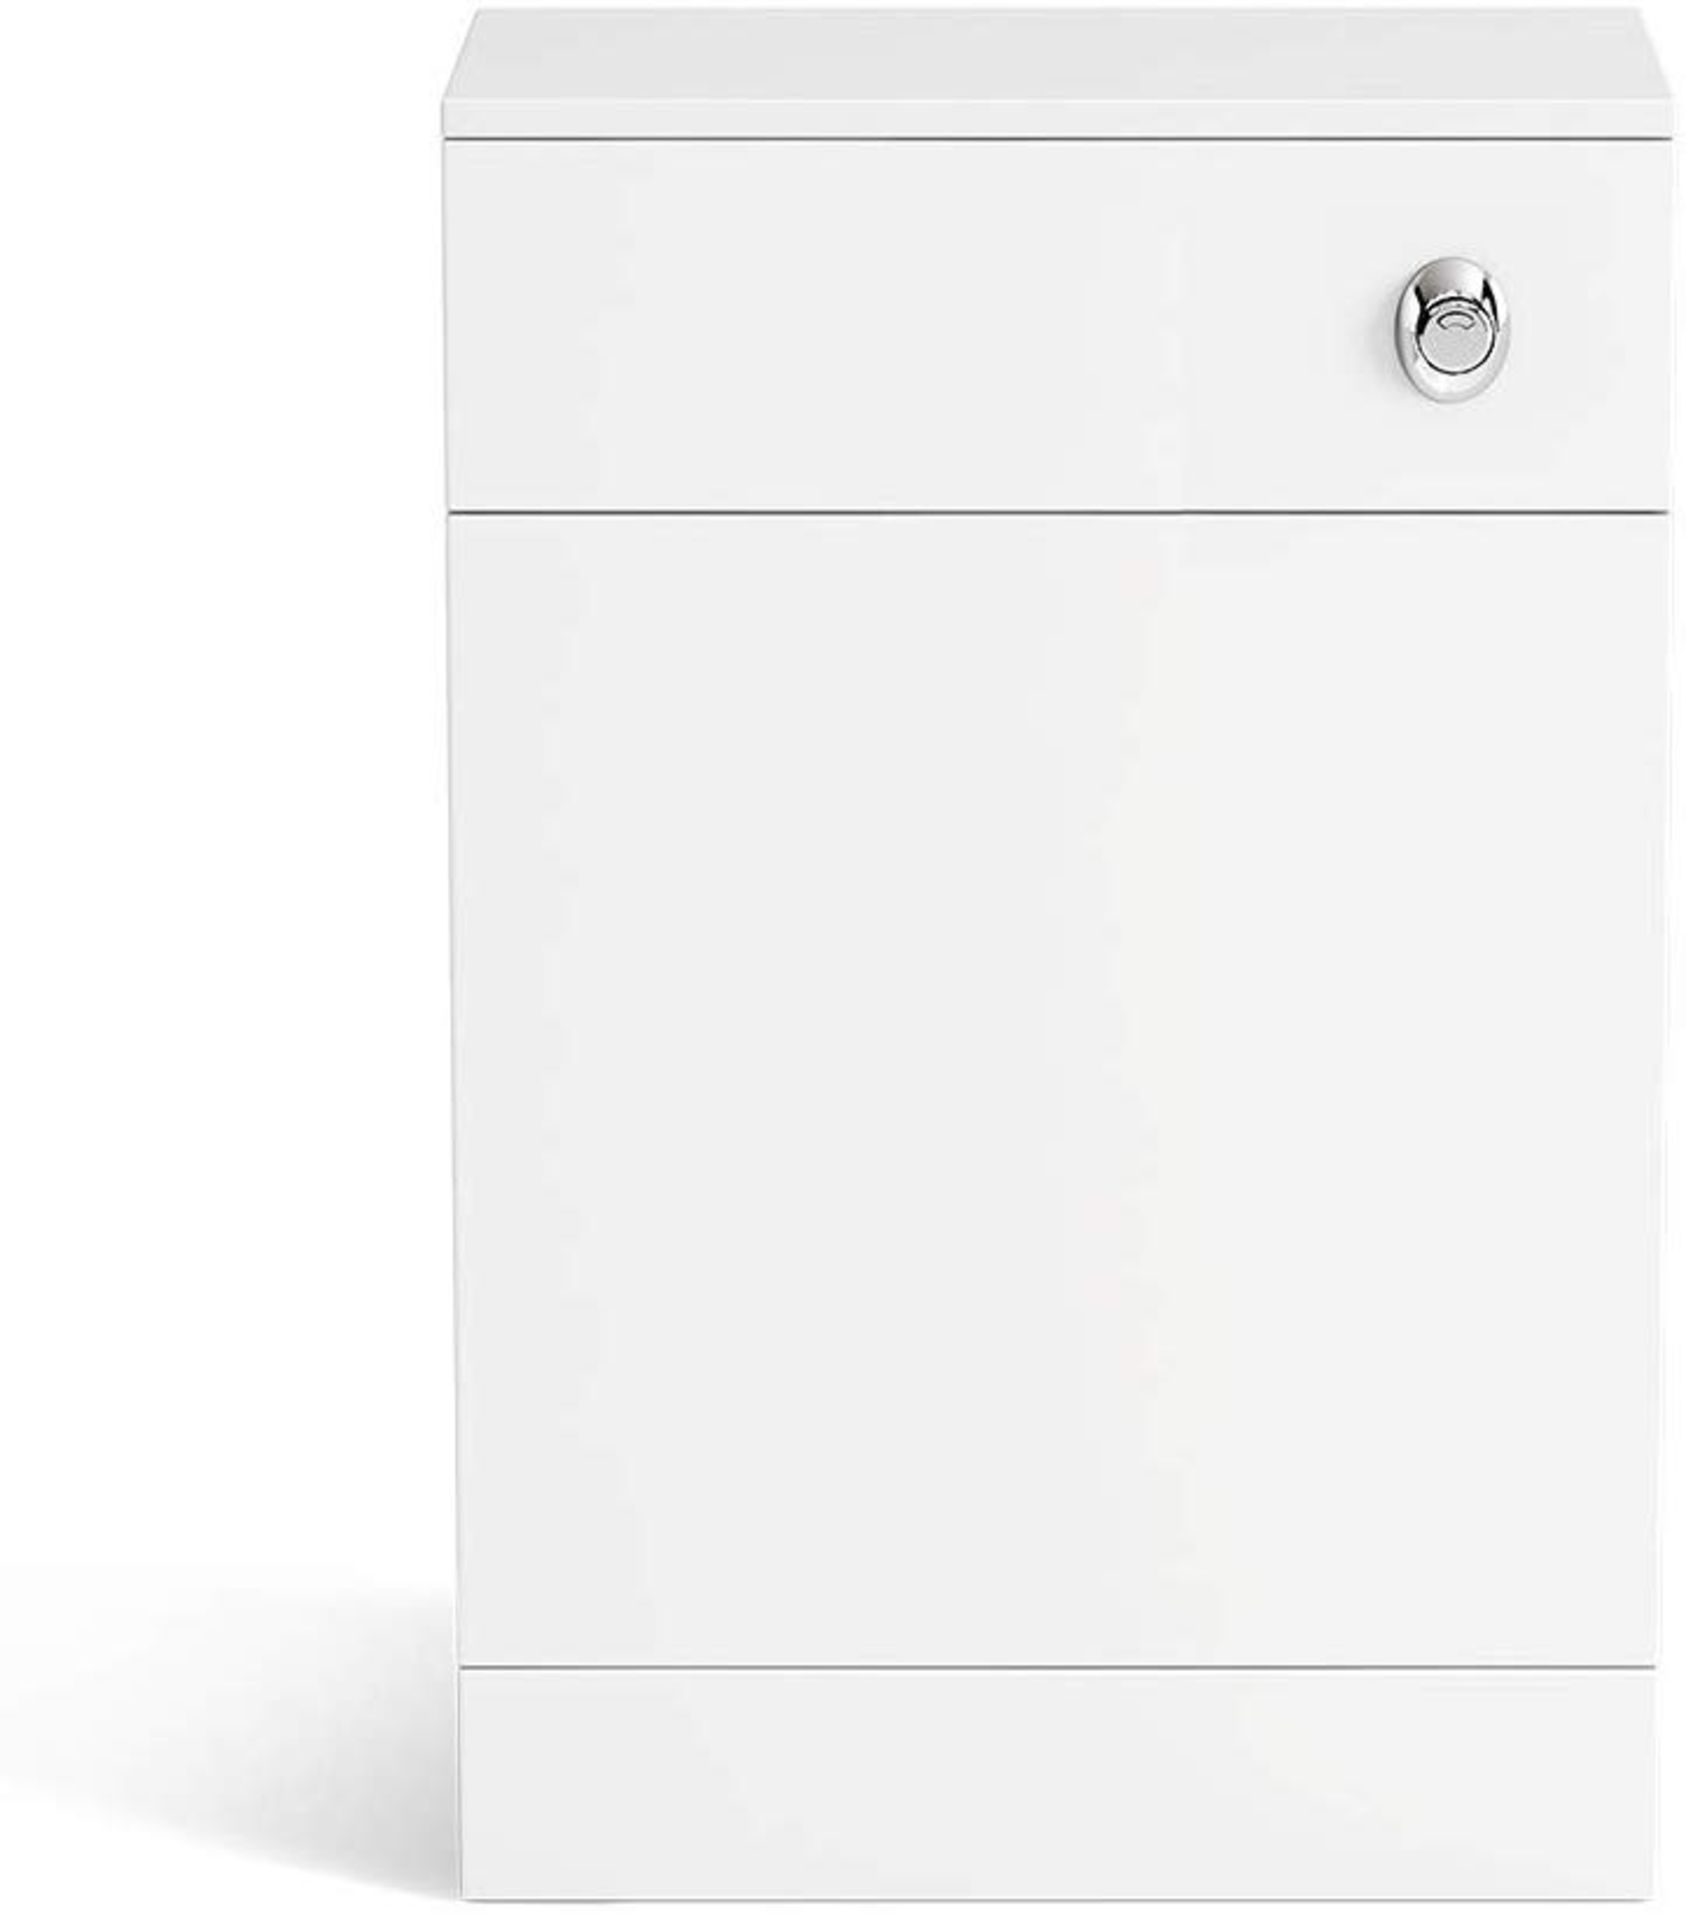 (HM74) 500x200 mm Concealed Cistern WC Unit Back To Wall Toilet Bathroom Furniture MF703. RRP ?... - Image 3 of 3